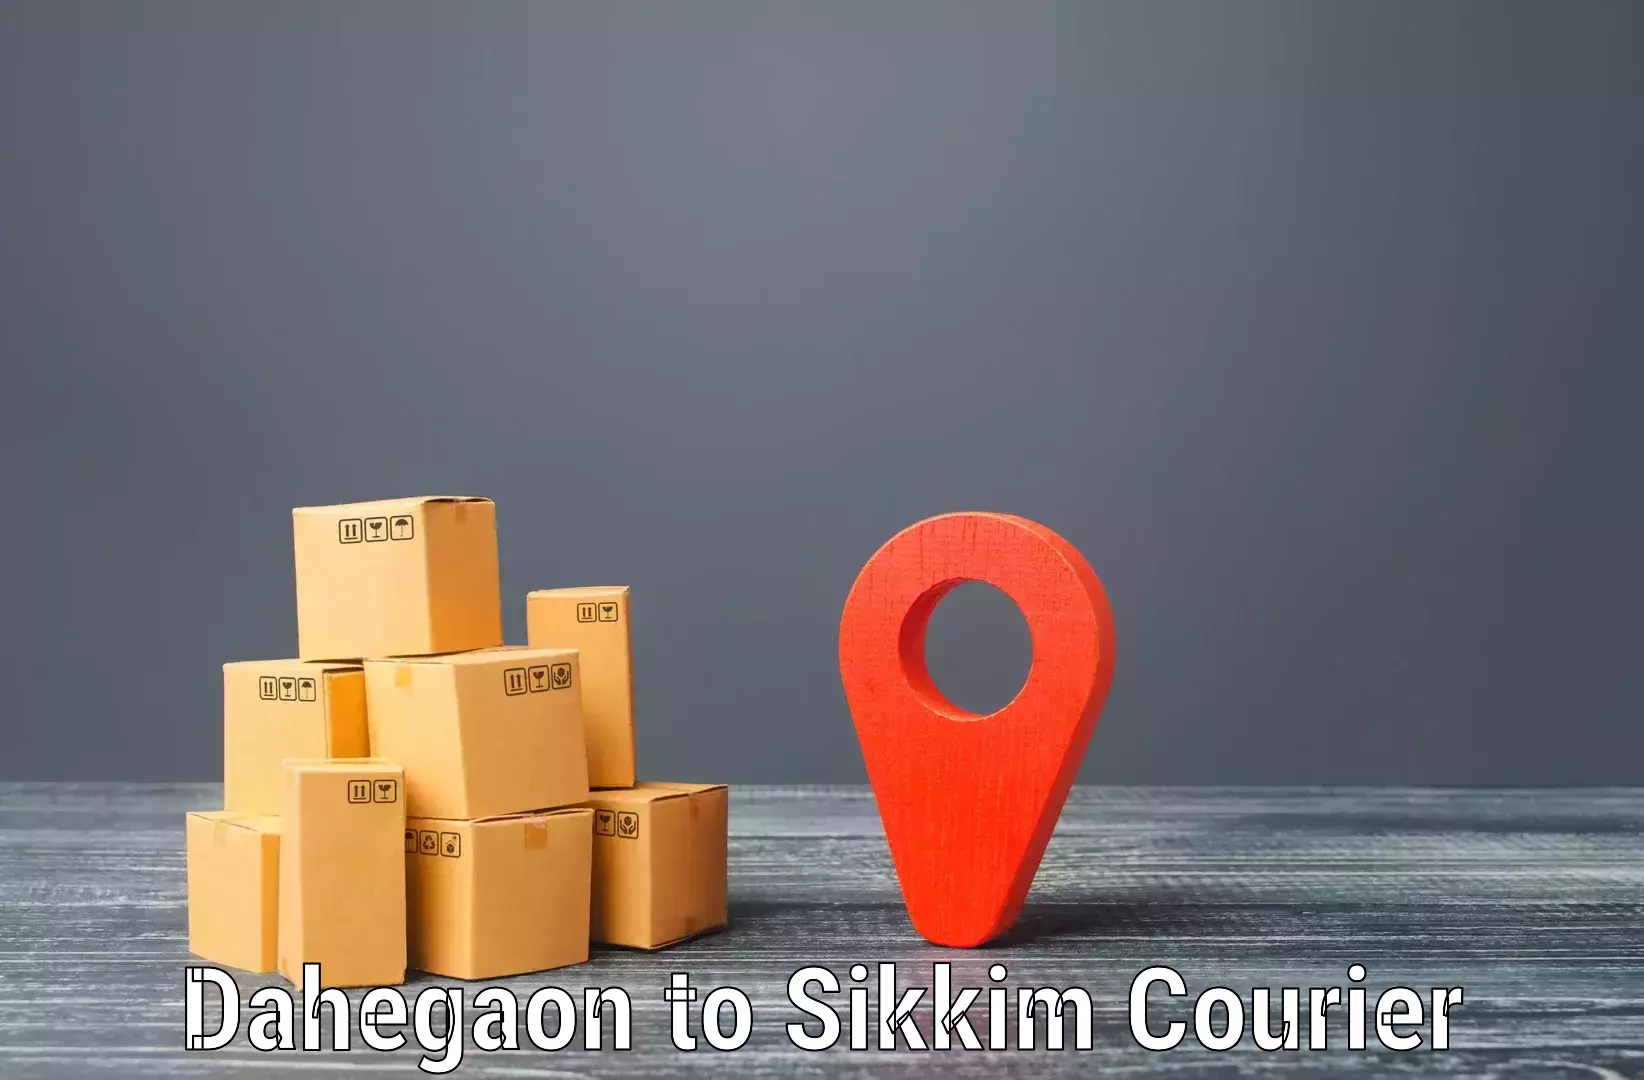 Retail shipping solutions in Dahegaon to Pelling